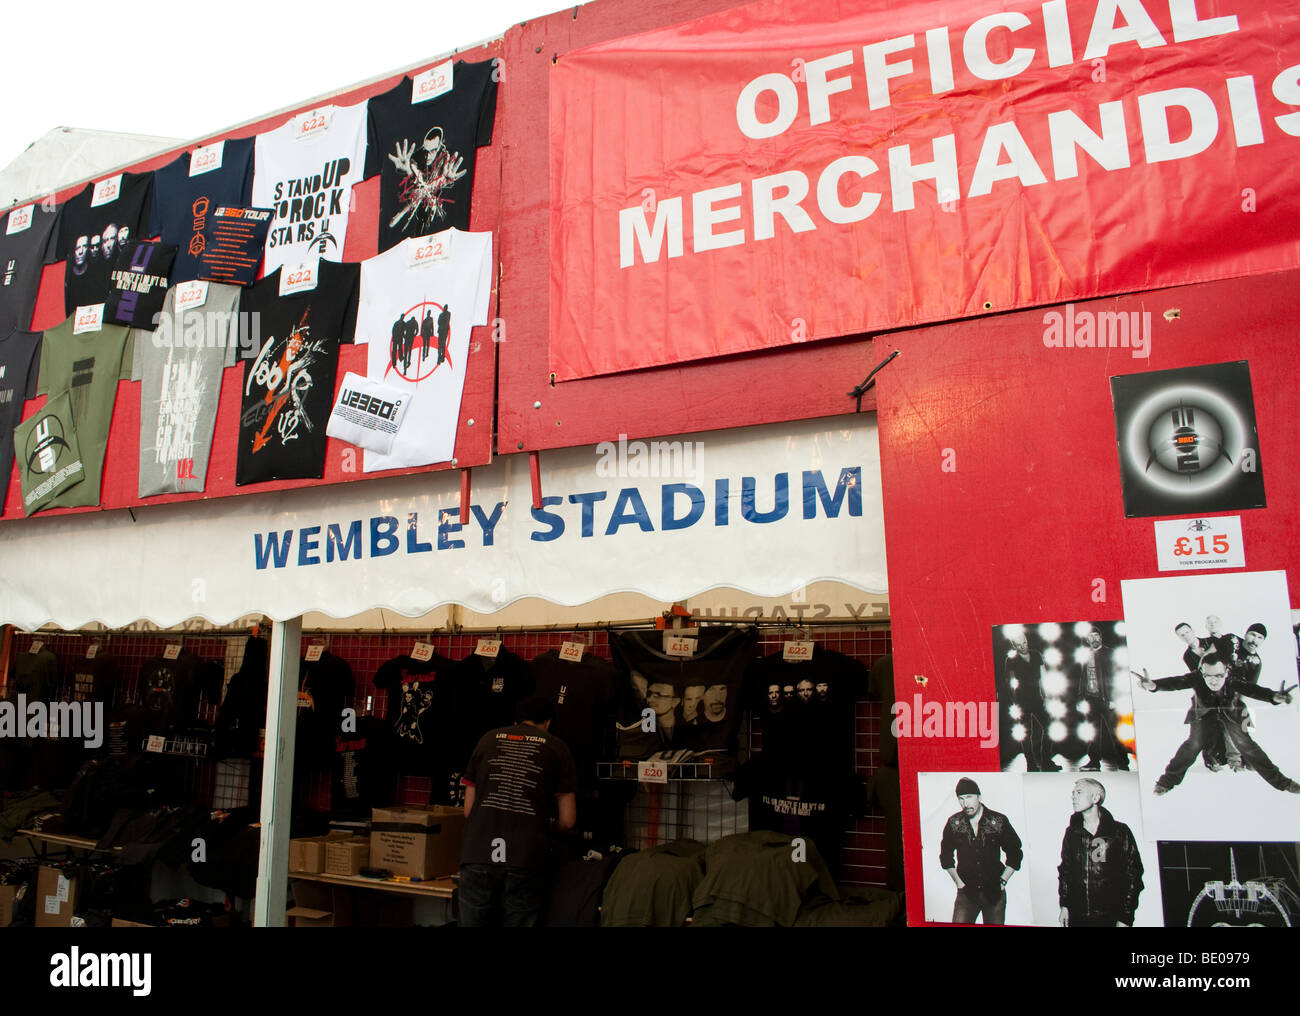 Official U2 merchandise for sale at Wembley Stadium in London Stock Photo